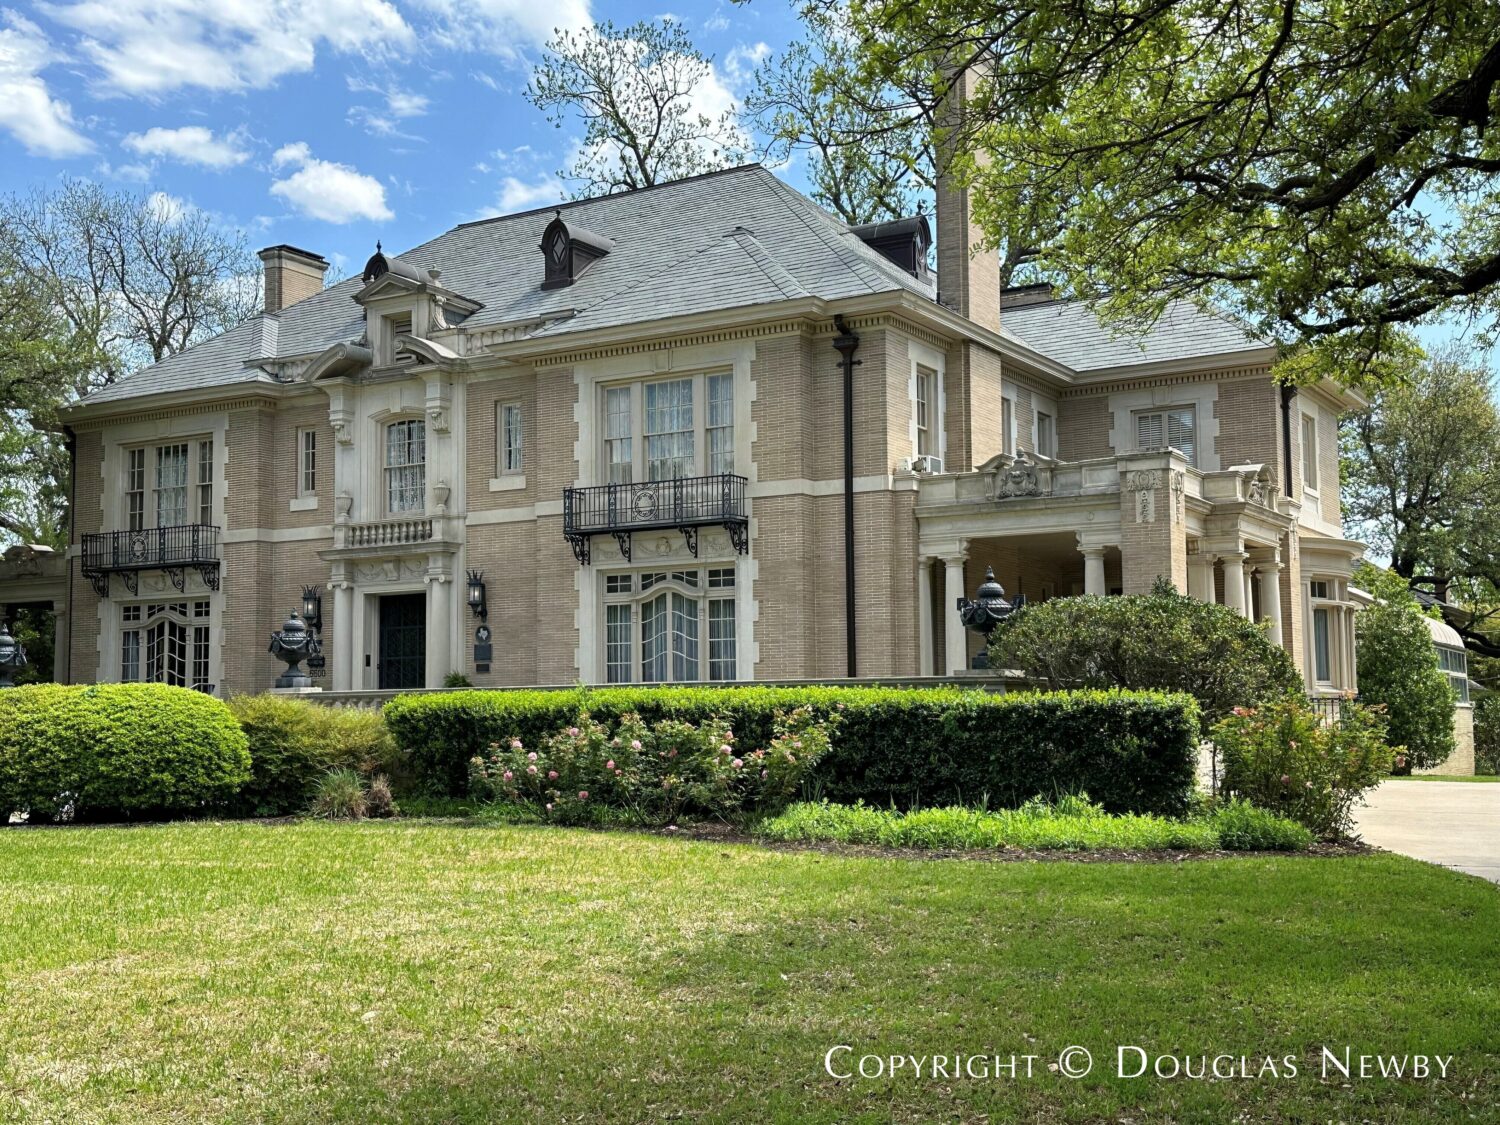 5500 Swiss Avenue, Dallas, Texas, is the patron house of the Preservation Dallas 50th Anniversary Home Tour.